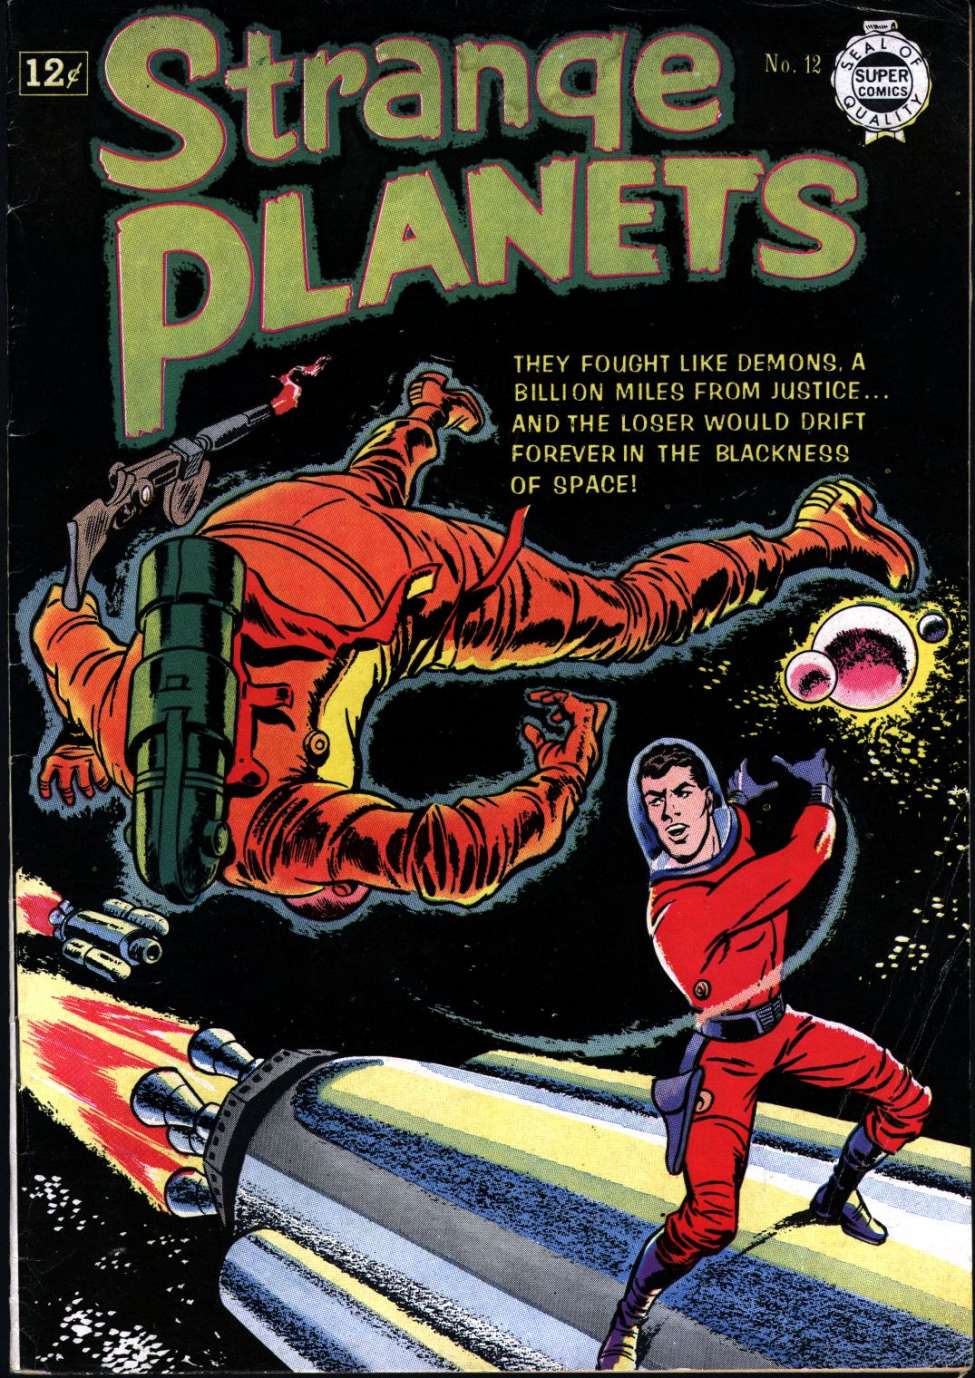 Book Cover For Strange Planets 12 - Version 2